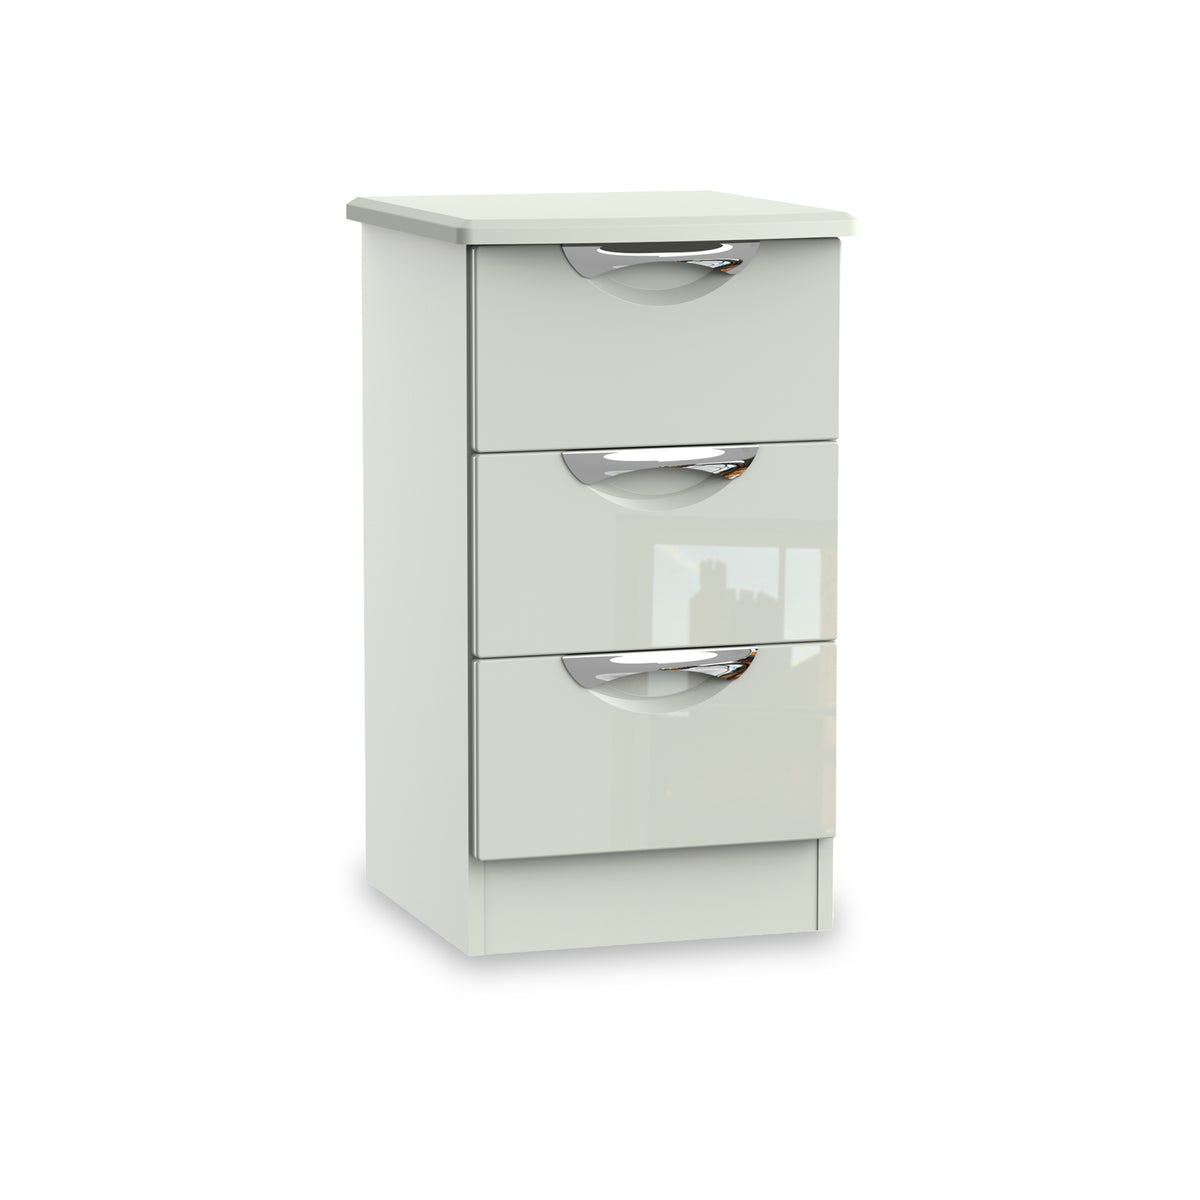 Beckett Cream 3 Drawer Bedside Table by Roseland Furniture